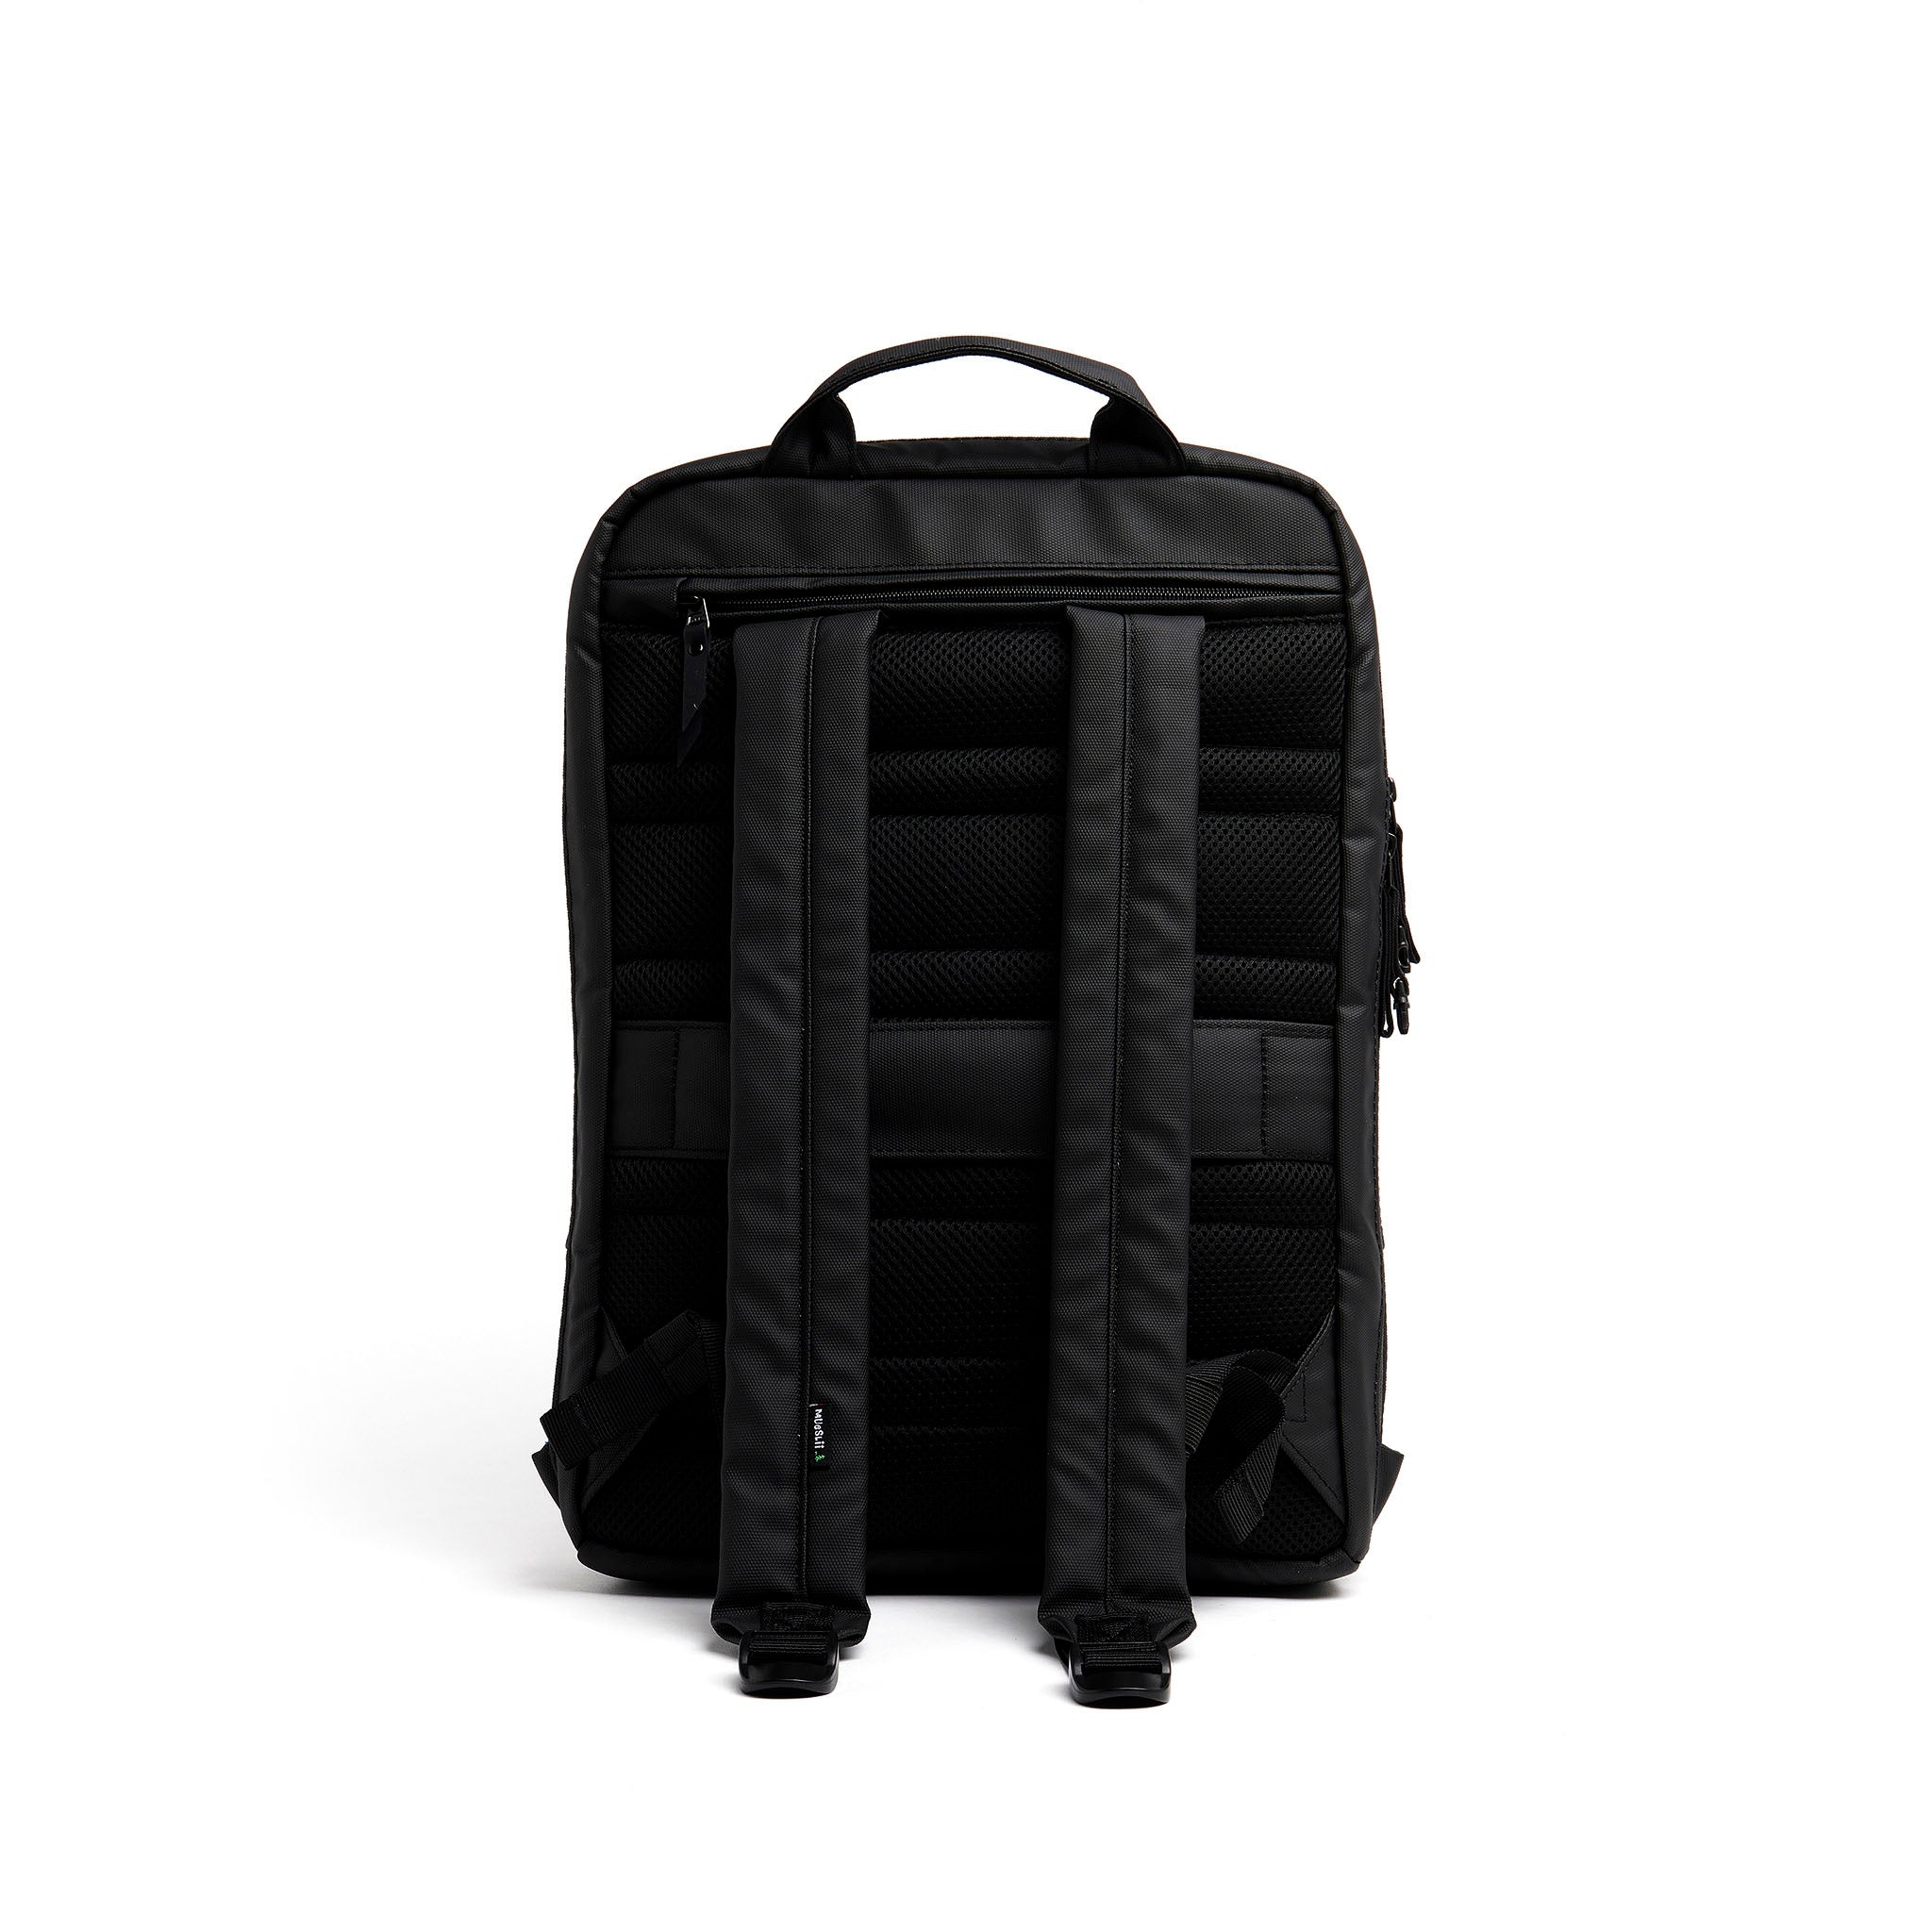 Mueslii daily backpack, made of PU coated waterproof nylon, with a laptop compartment, color black, back view.